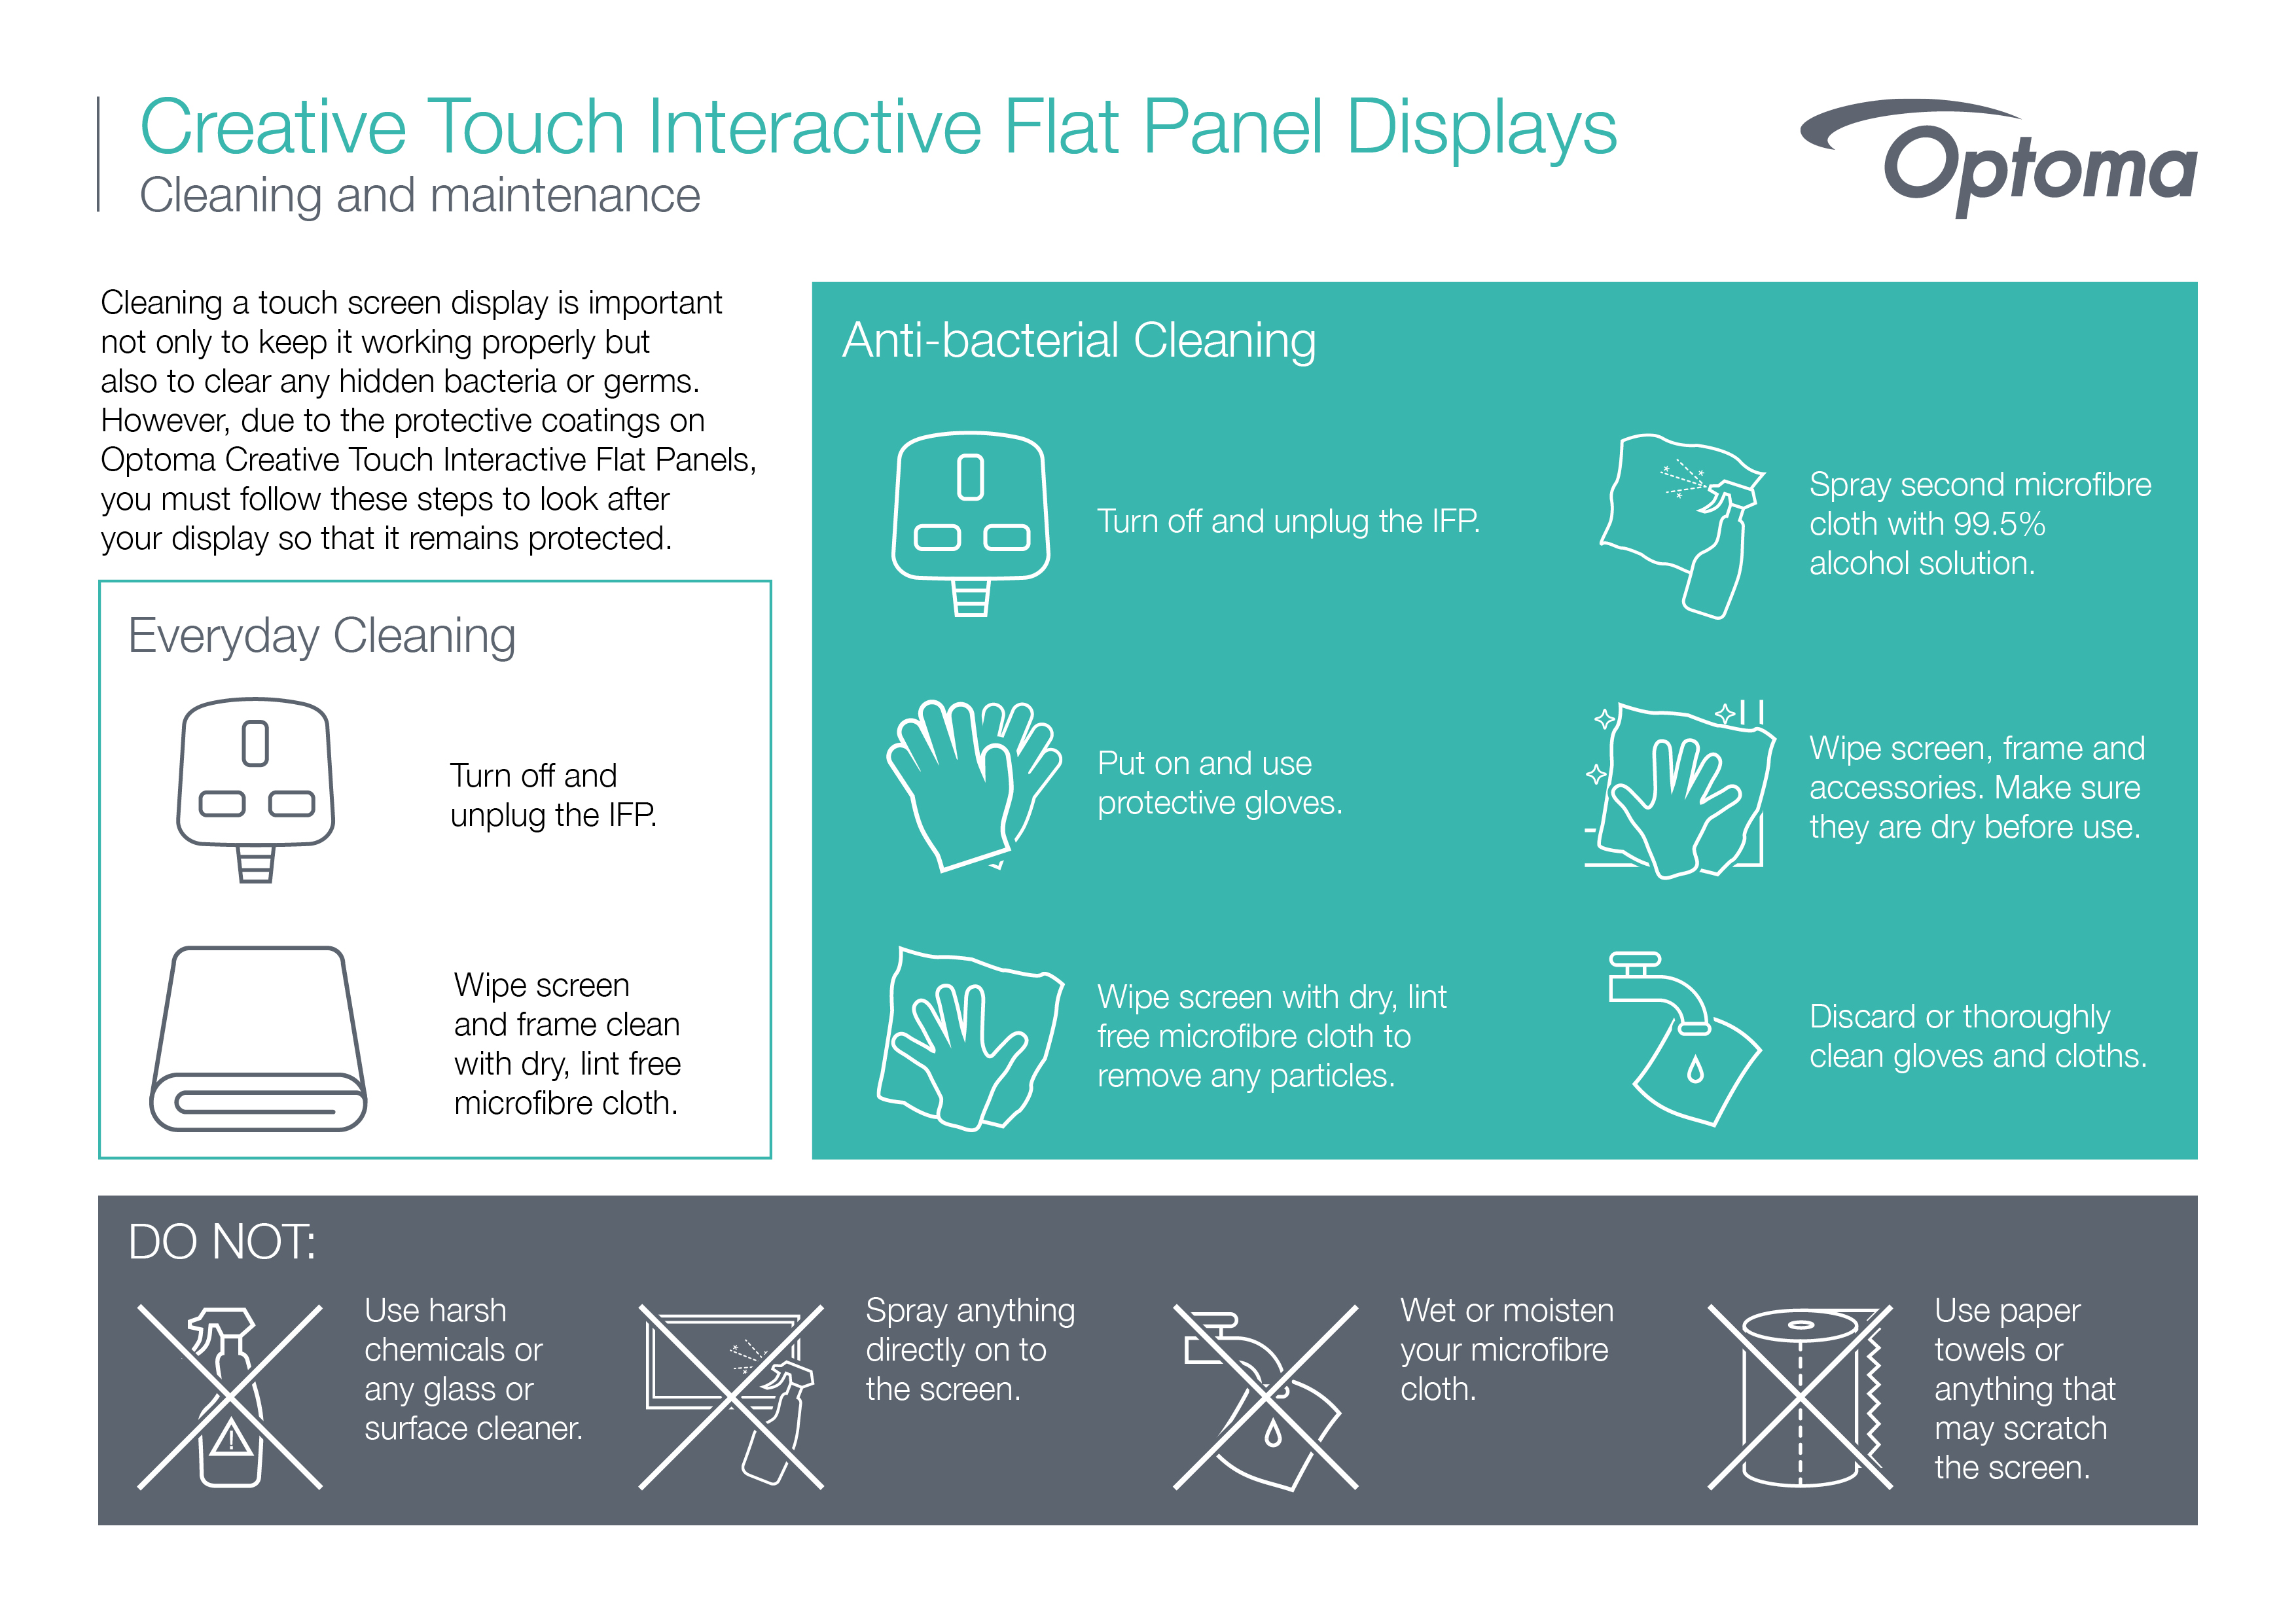 How to Clean your Interactive Flat Panel Display